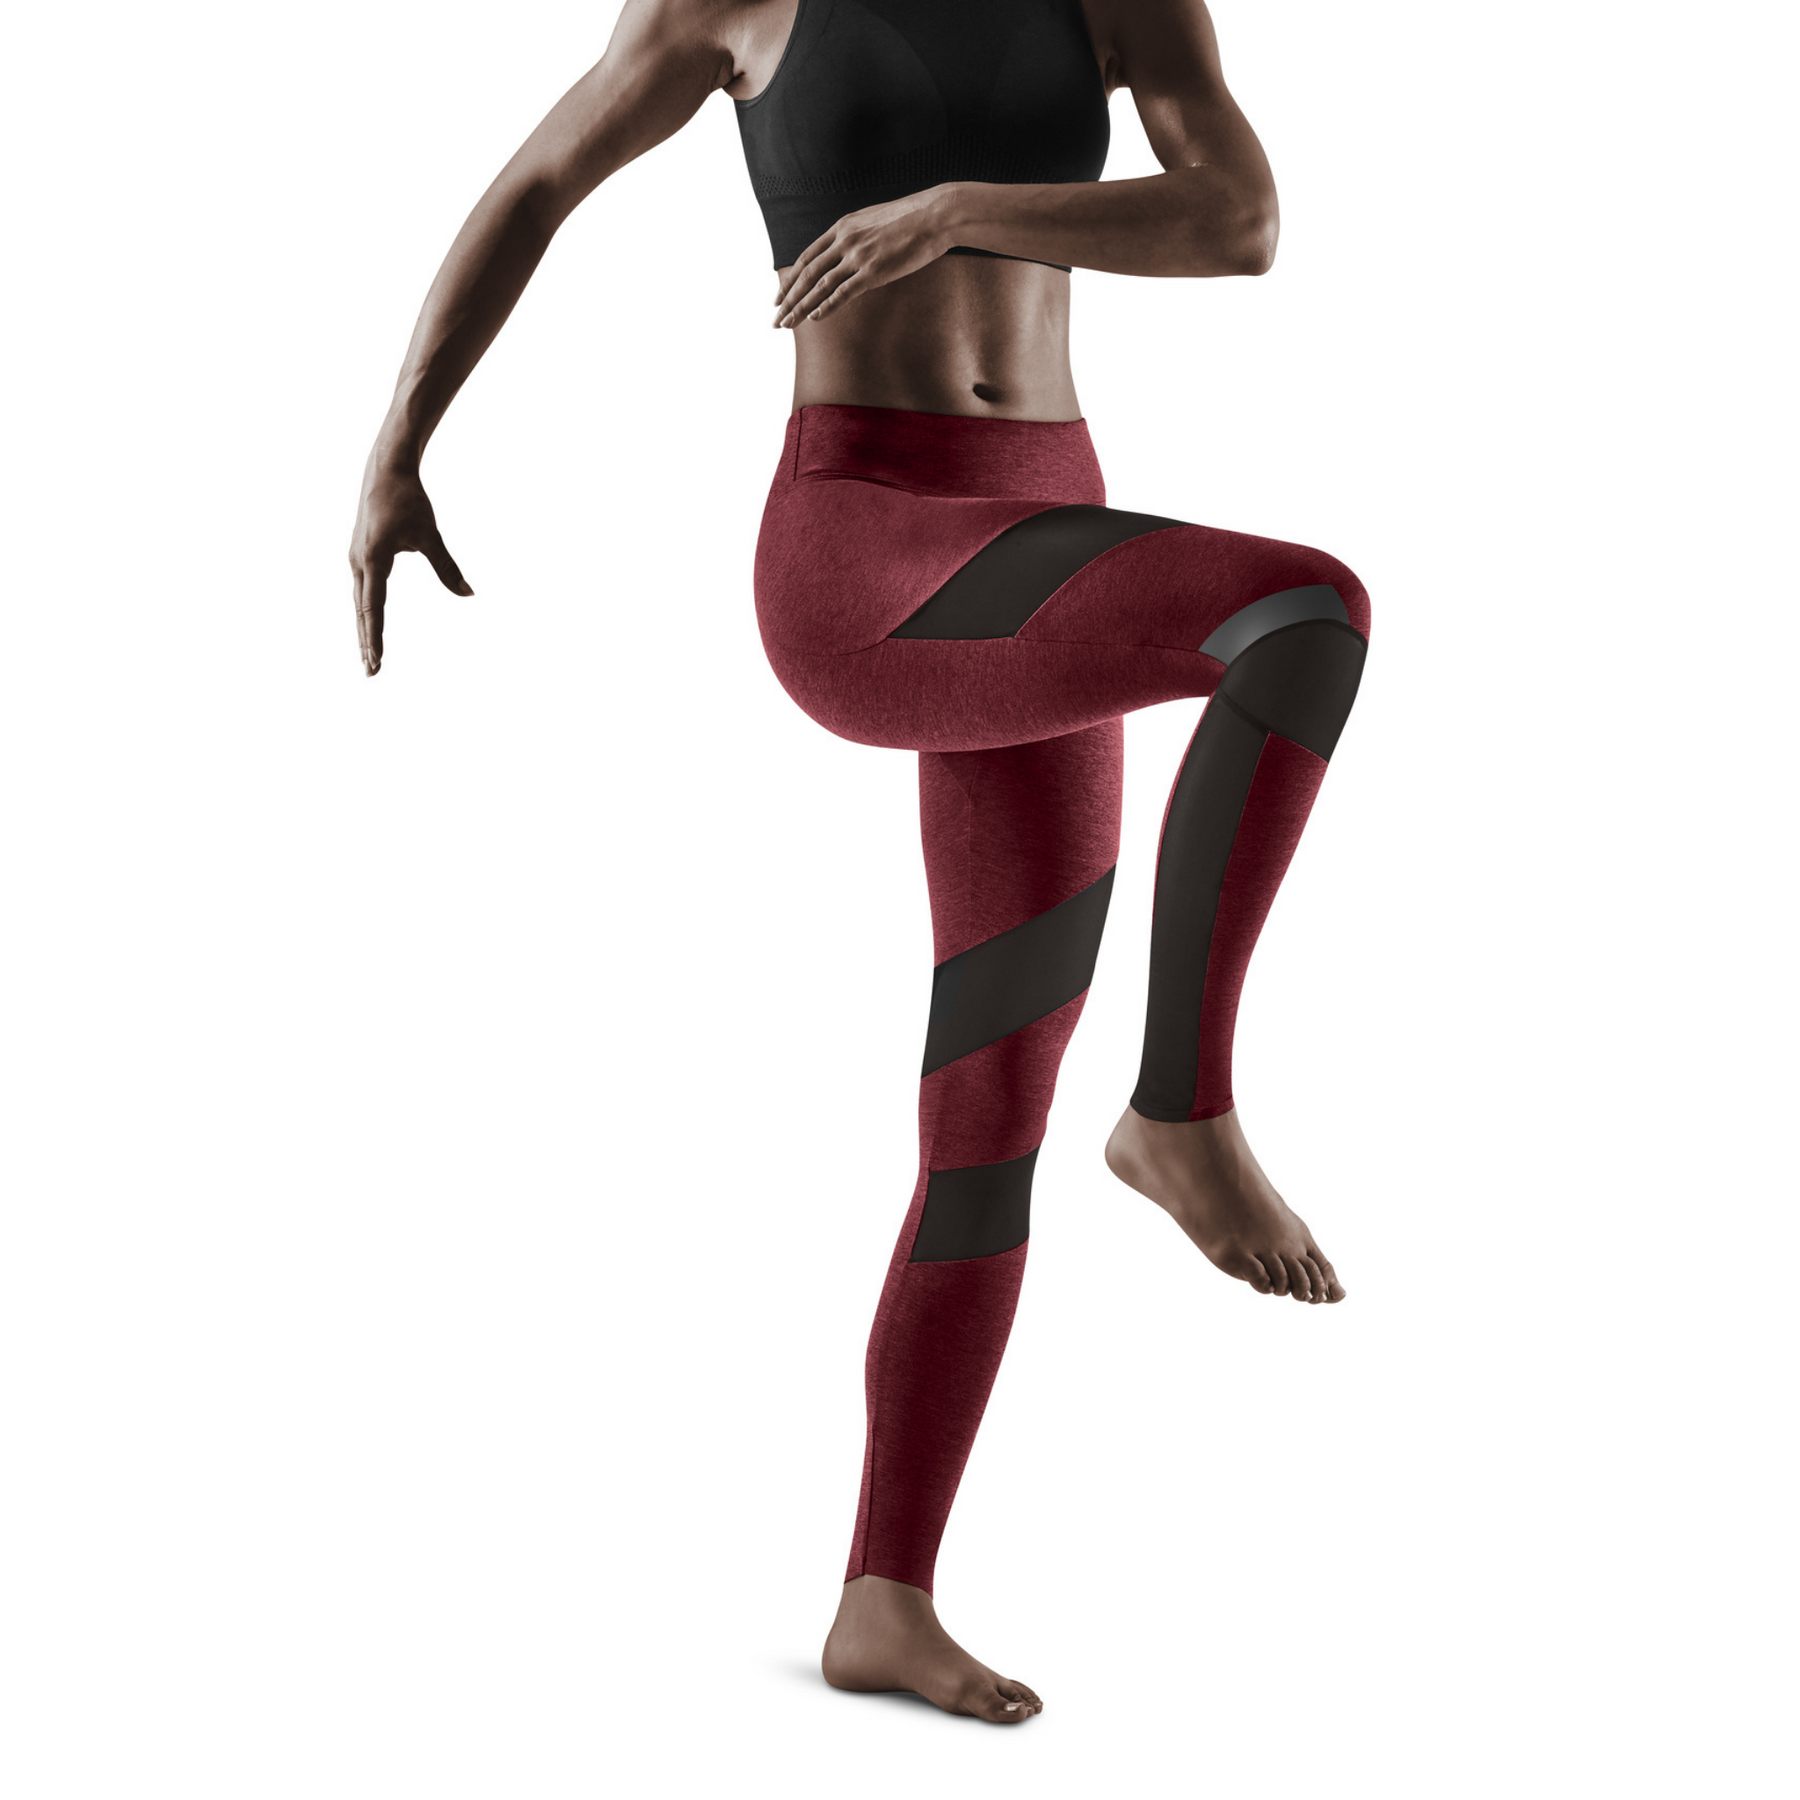 Women's Leggings and Tights, Sports, Fashion